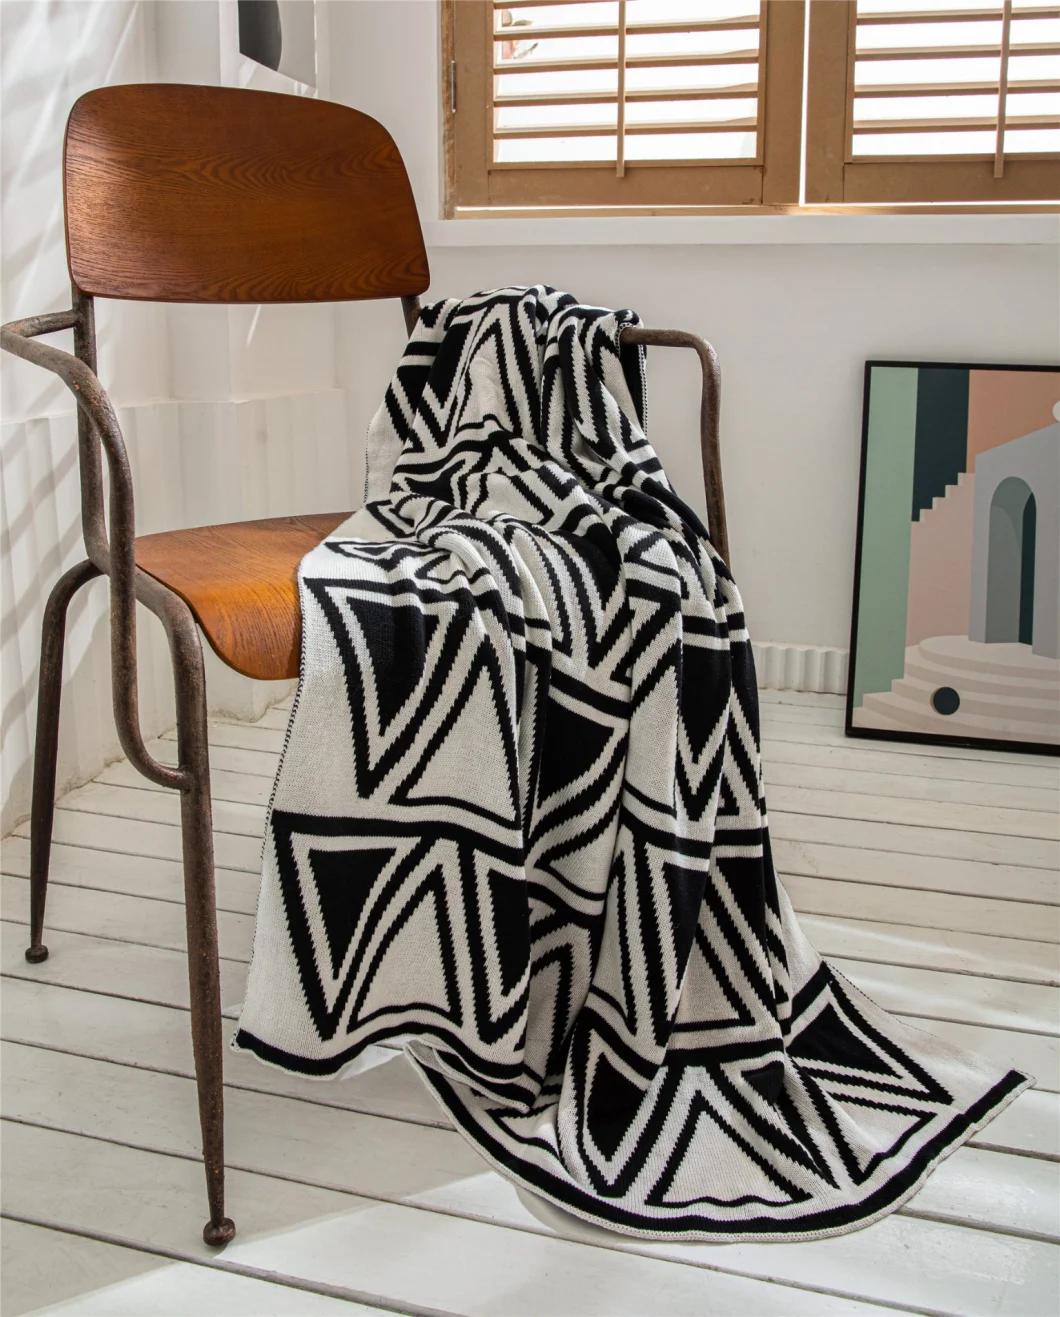 Simple Geometry Black and White Triangle Knitting Blanket Sofa Cover Blanket Soft Wear with Office Shawl Blanket